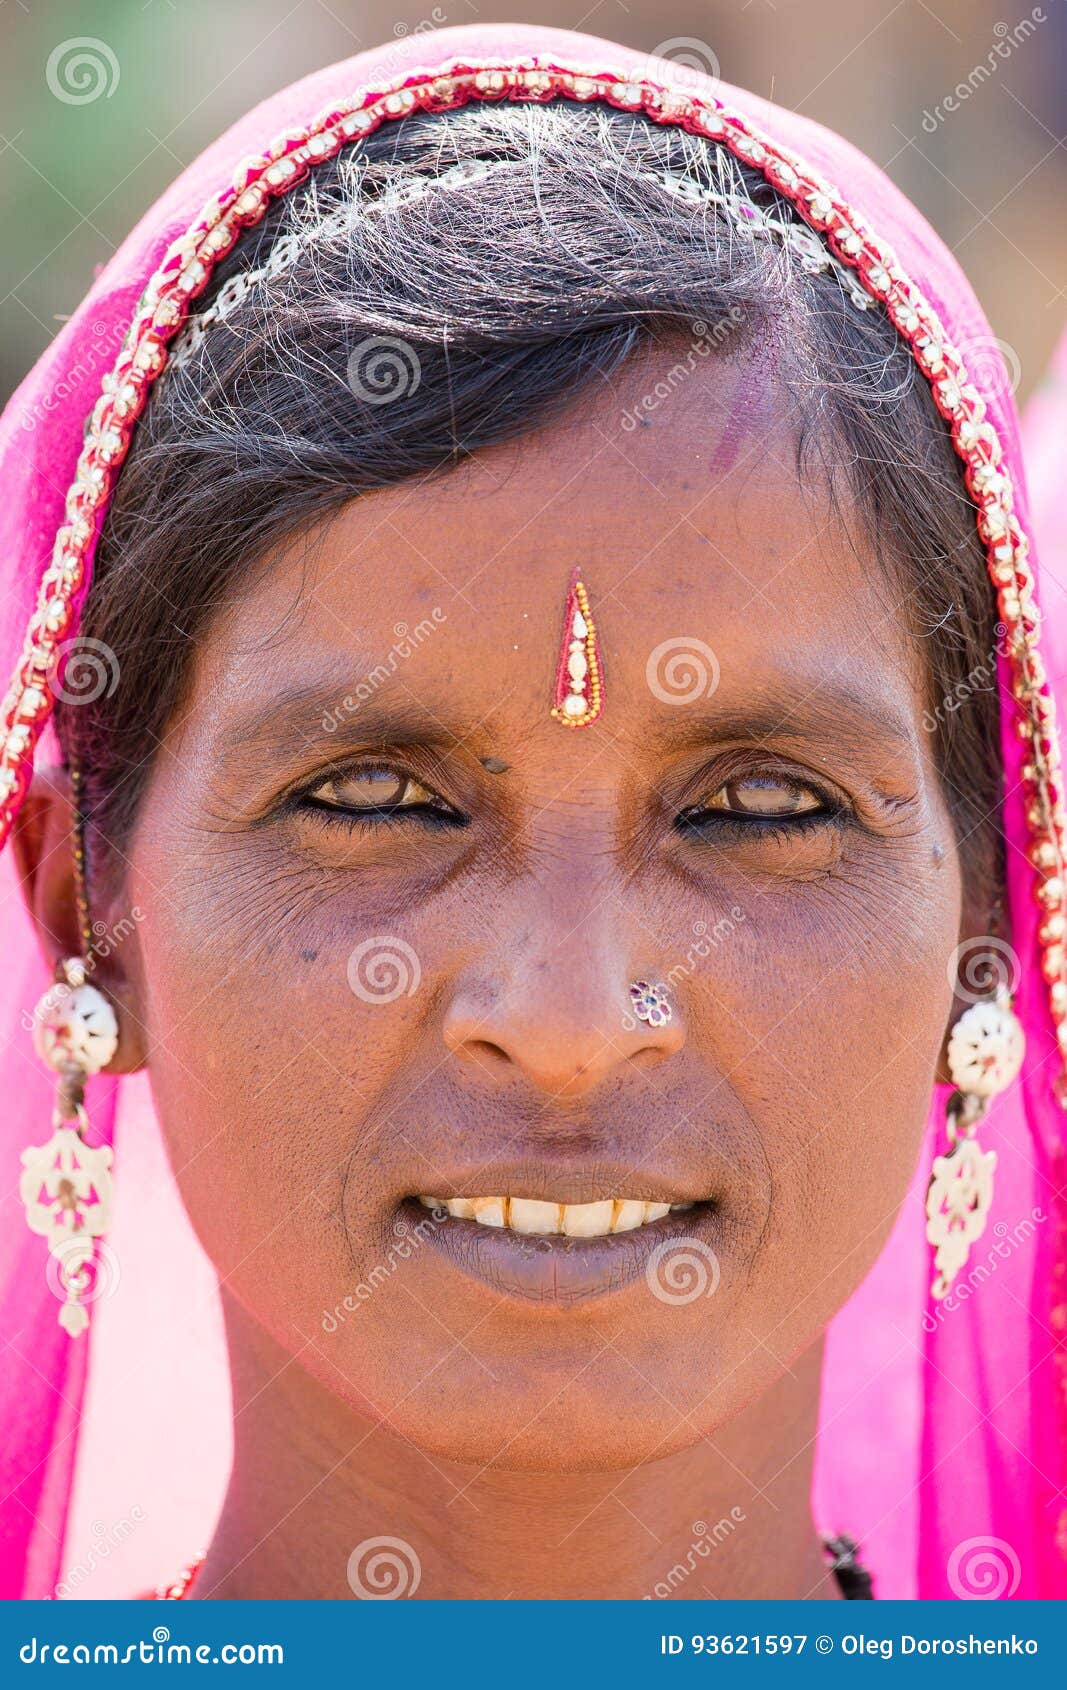 Gypsy India Images - Download 1,313 Royalty Free Photos - Page 5